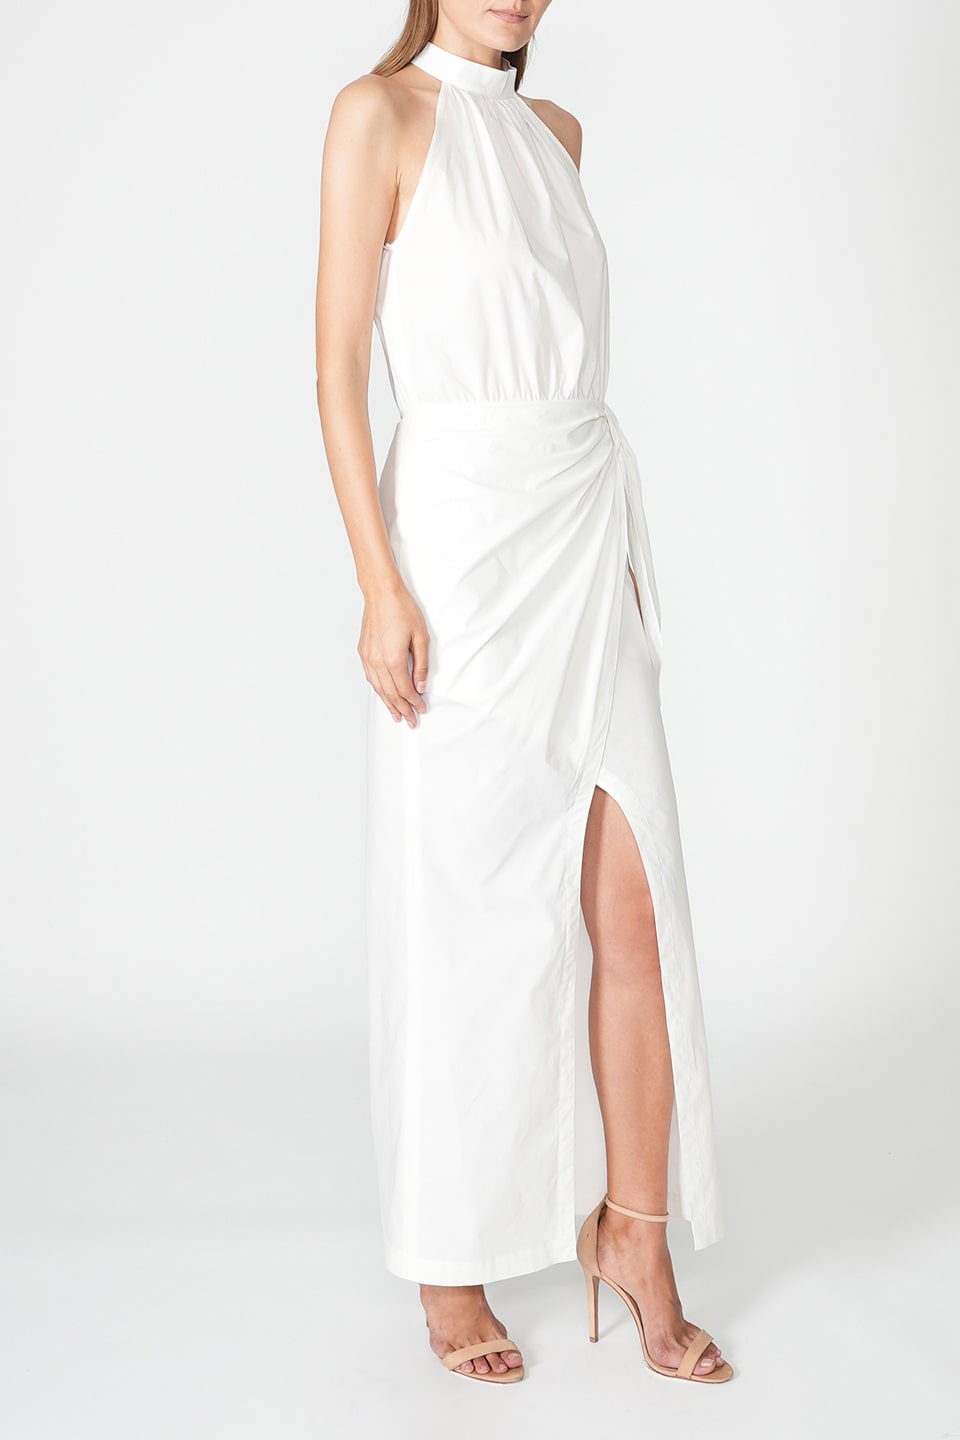 Shop online trendy White Midi dresses from Federica Tosi Fashion designer. Product gallery 1